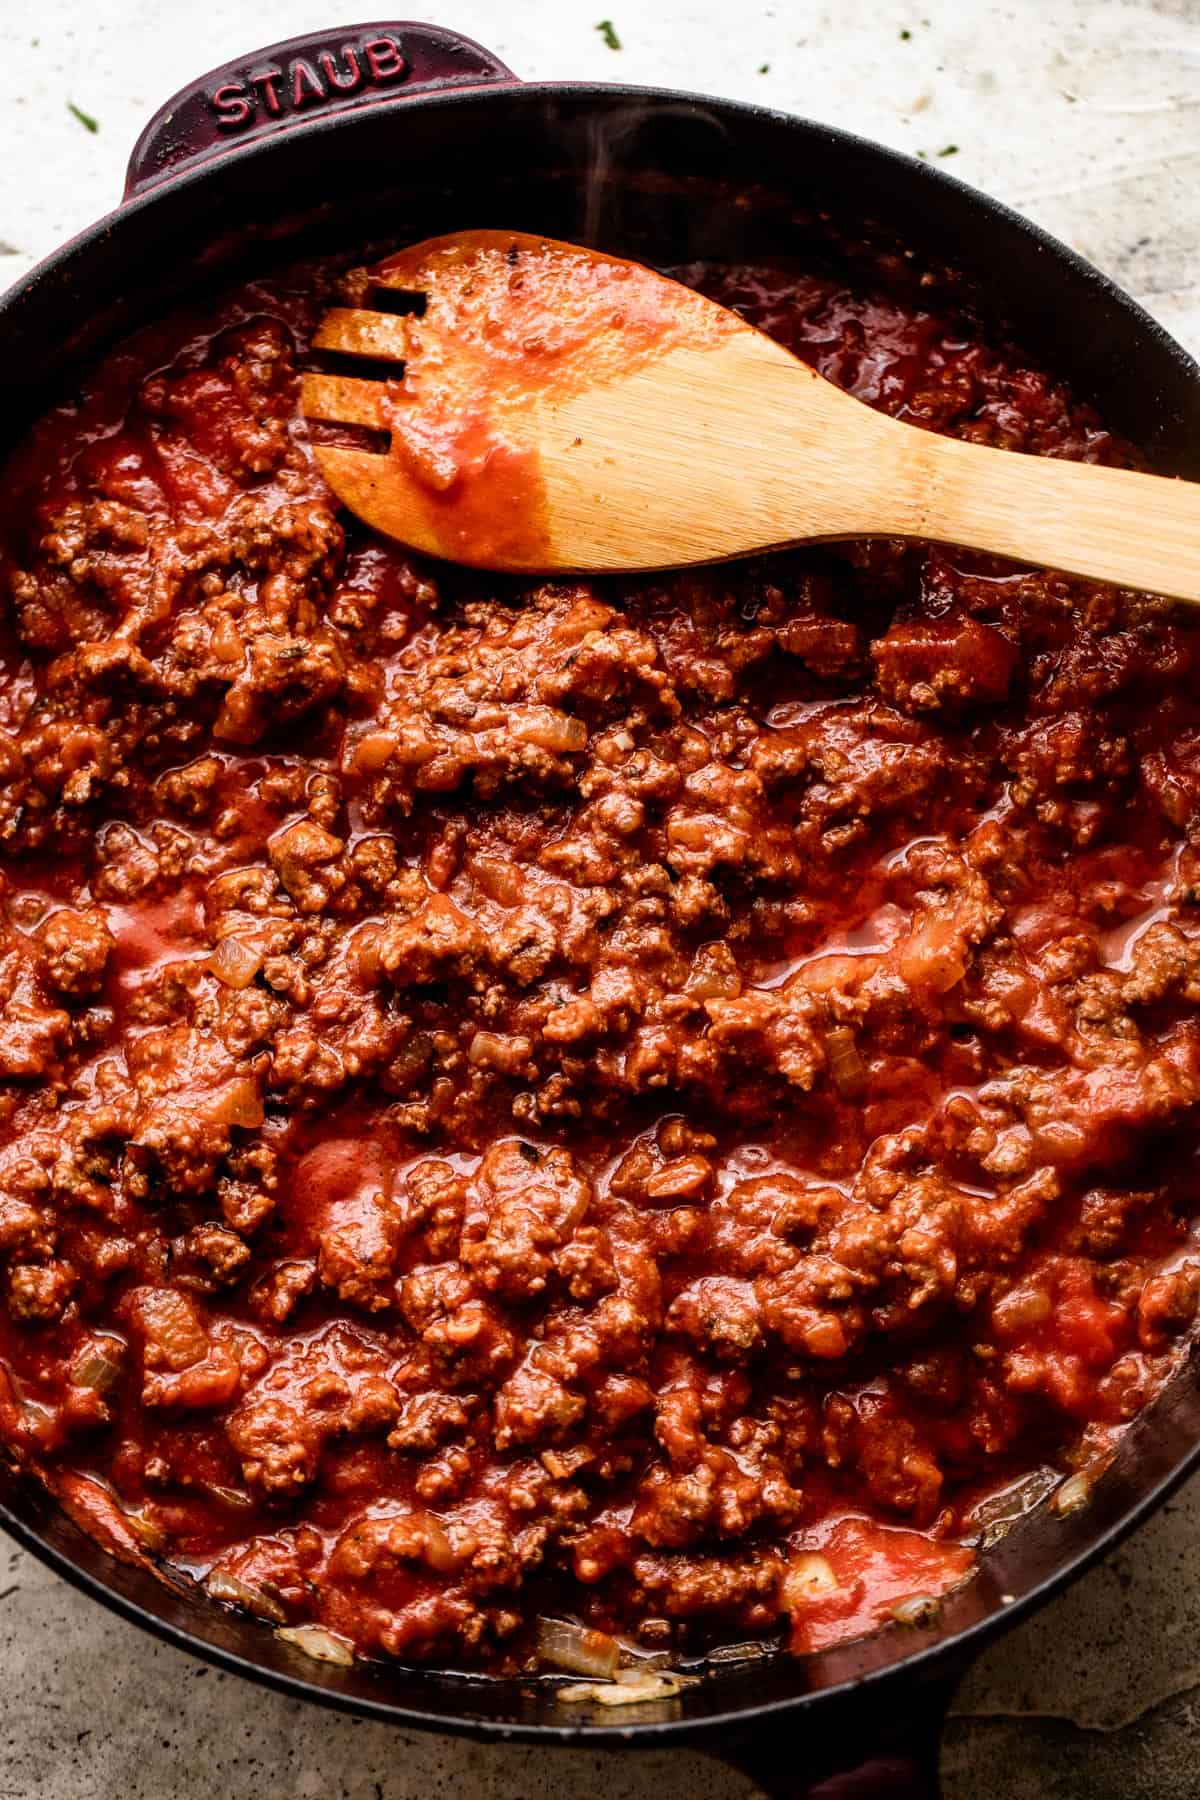 wooden spoon stirring through ground beef that's cooking in a black skillet.